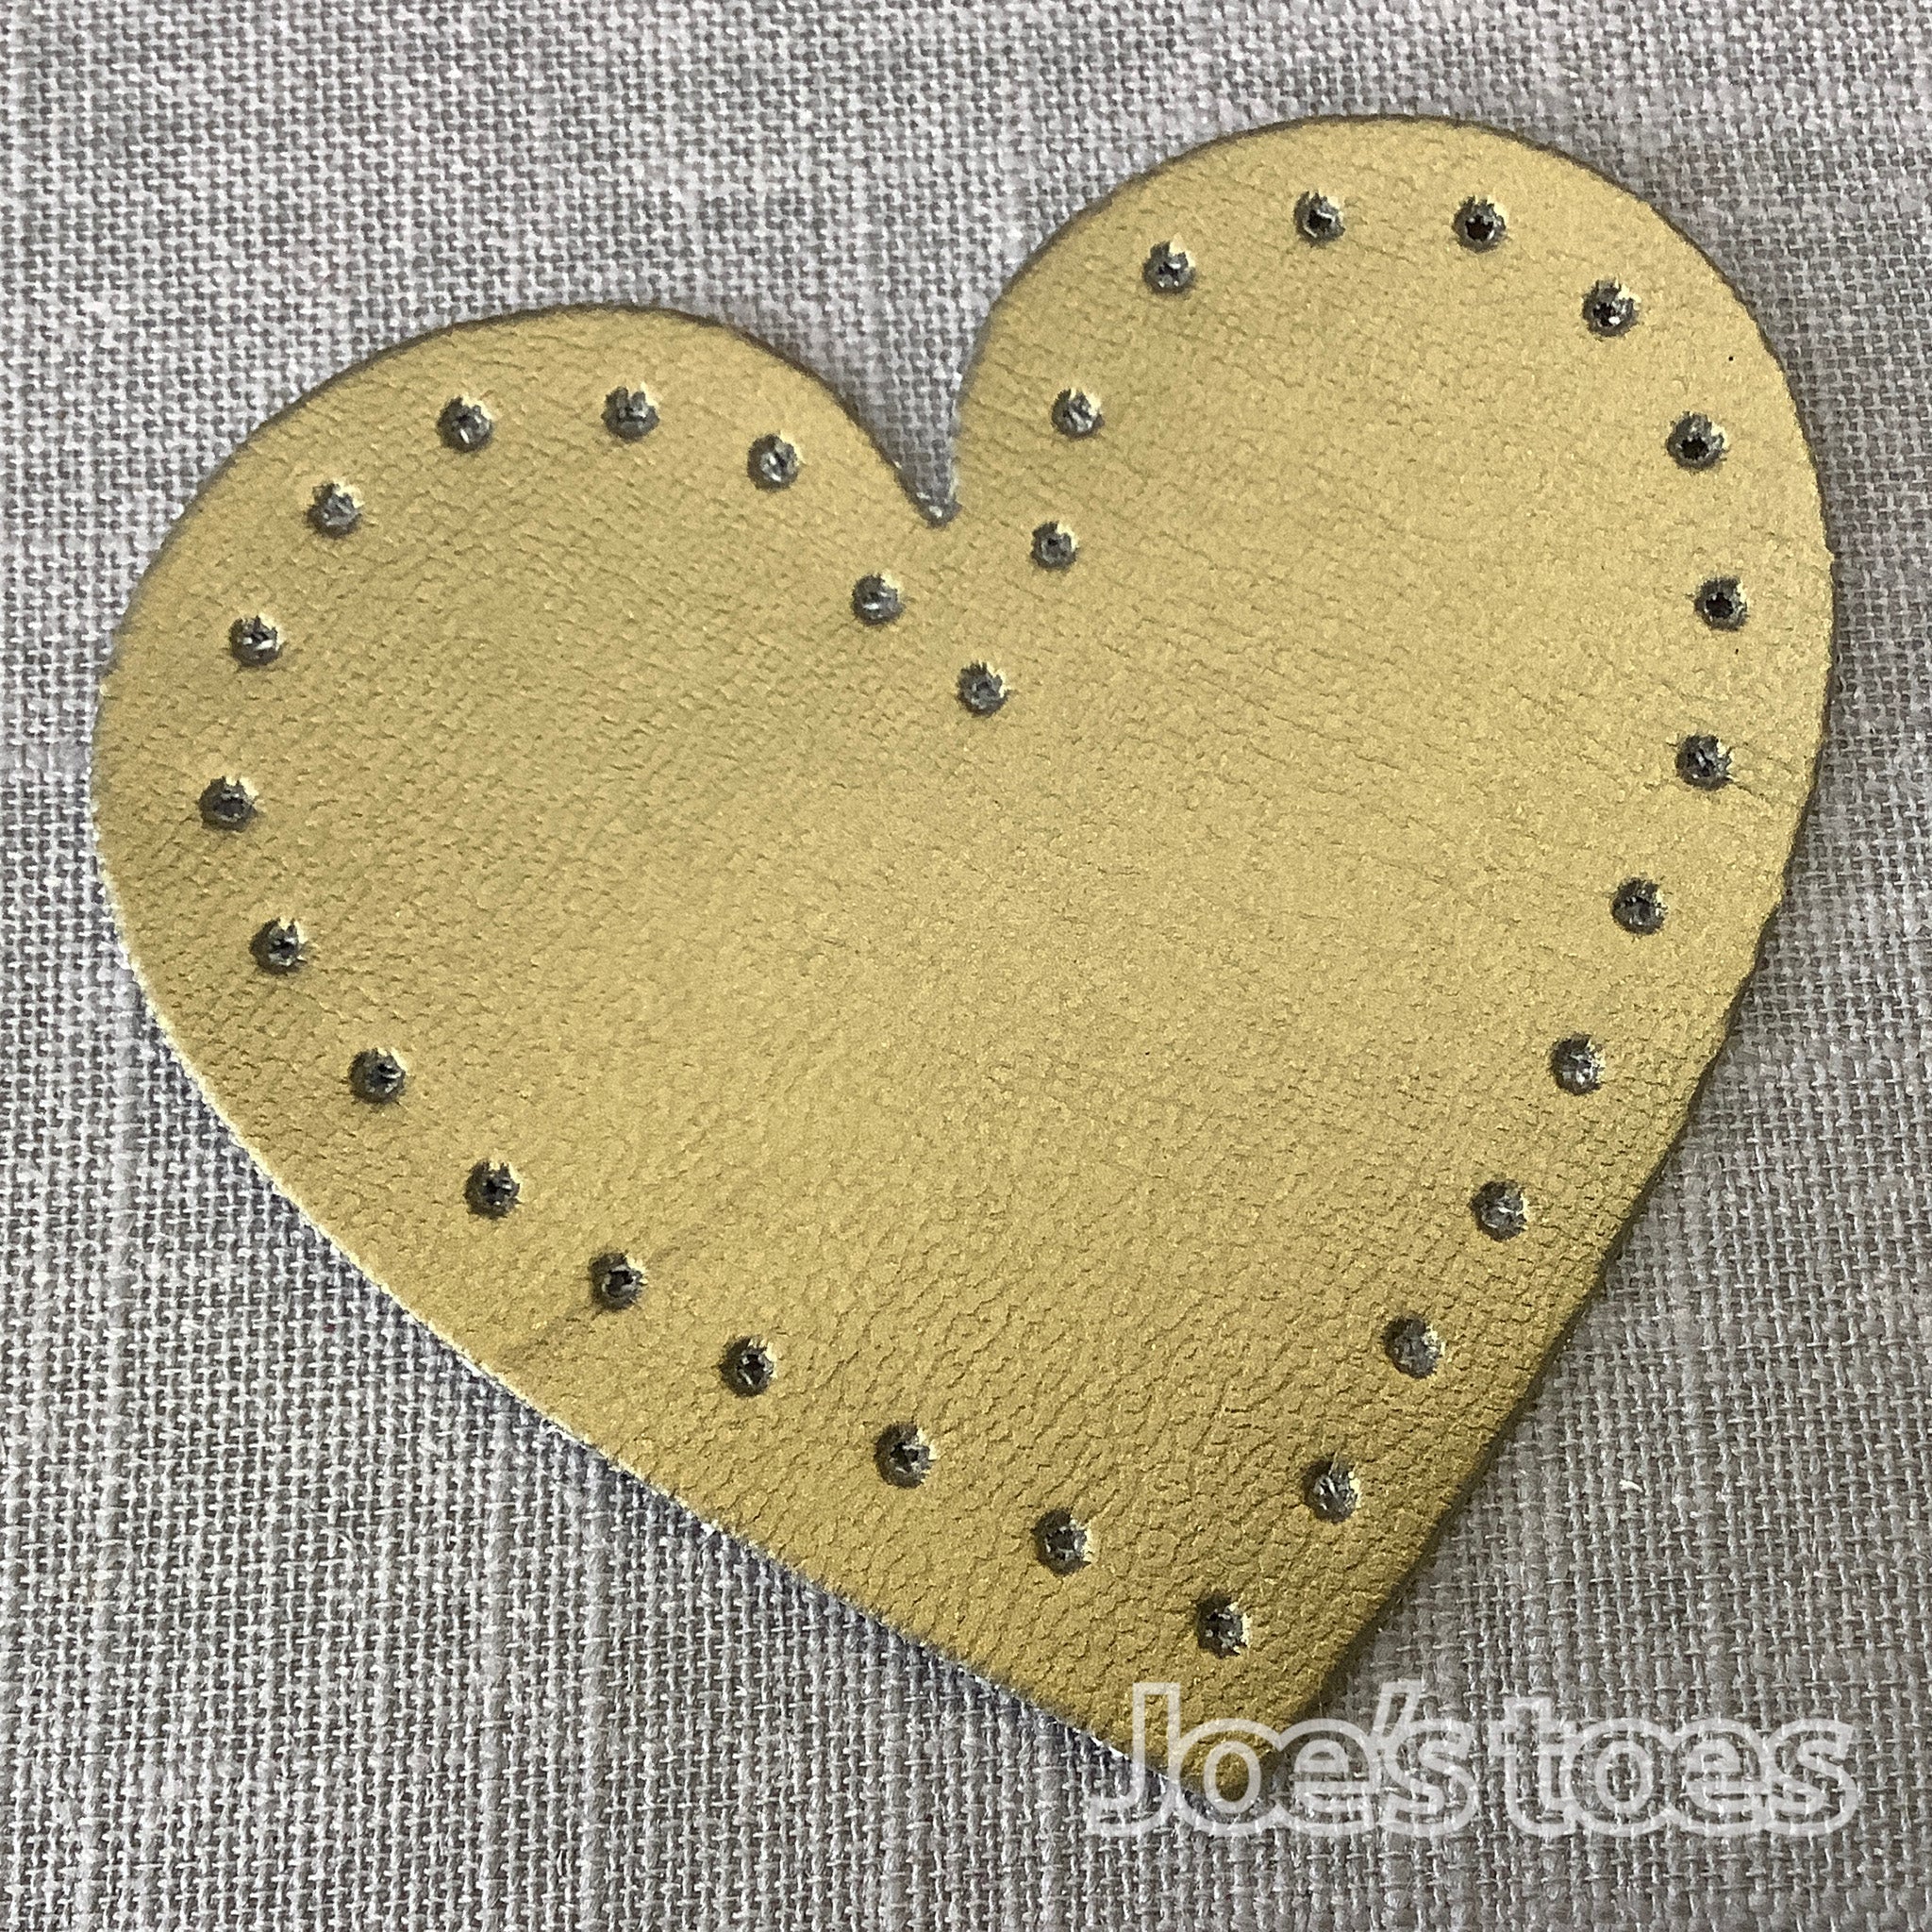 Heart Shaped Sew On Patches  Elbow or Knee Patches – Joe's Toes US